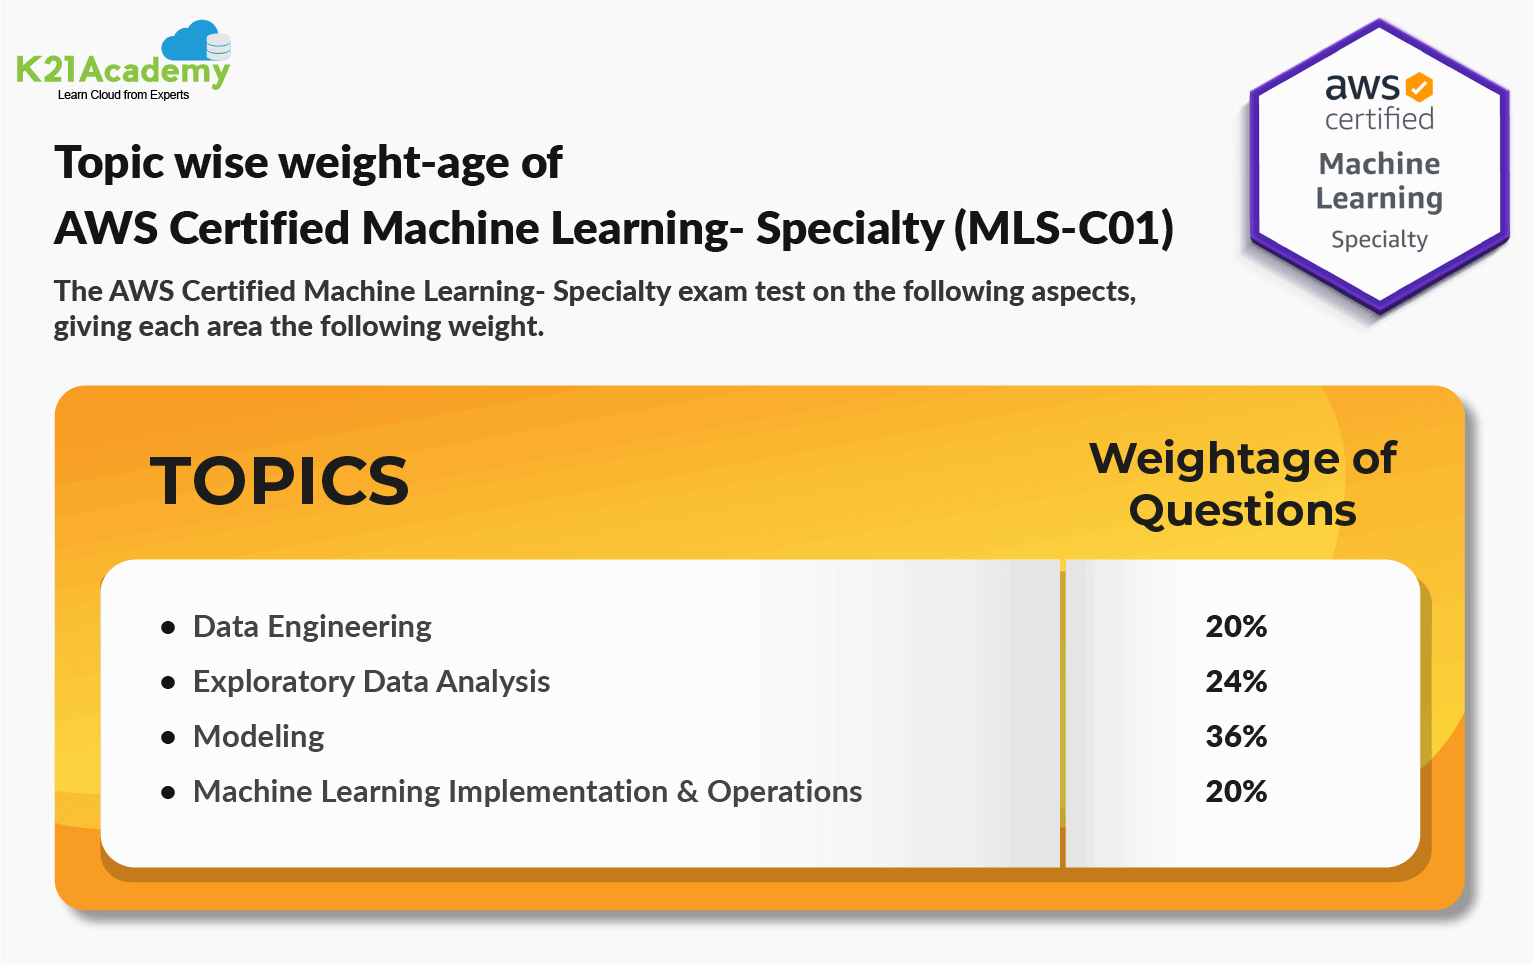 AWS-Certified-Machine-Learning-Specialty Test Simulator Online